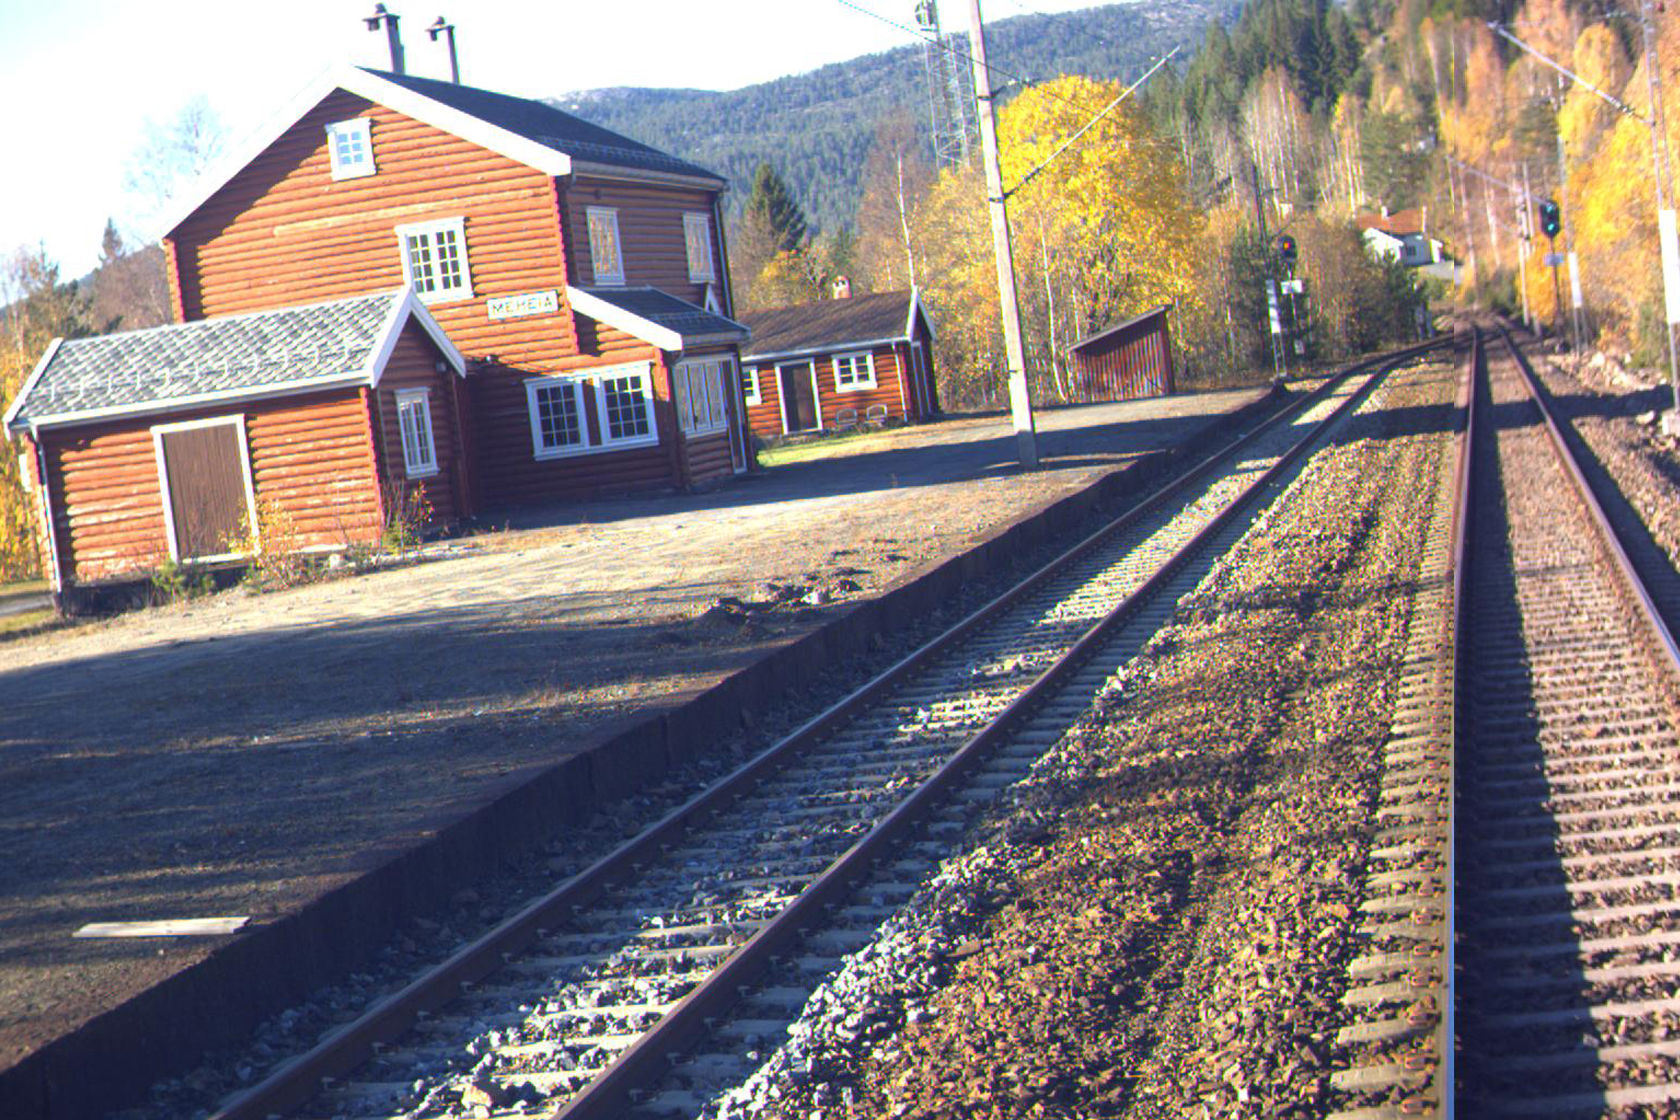 Tracks and station building at Meheia station